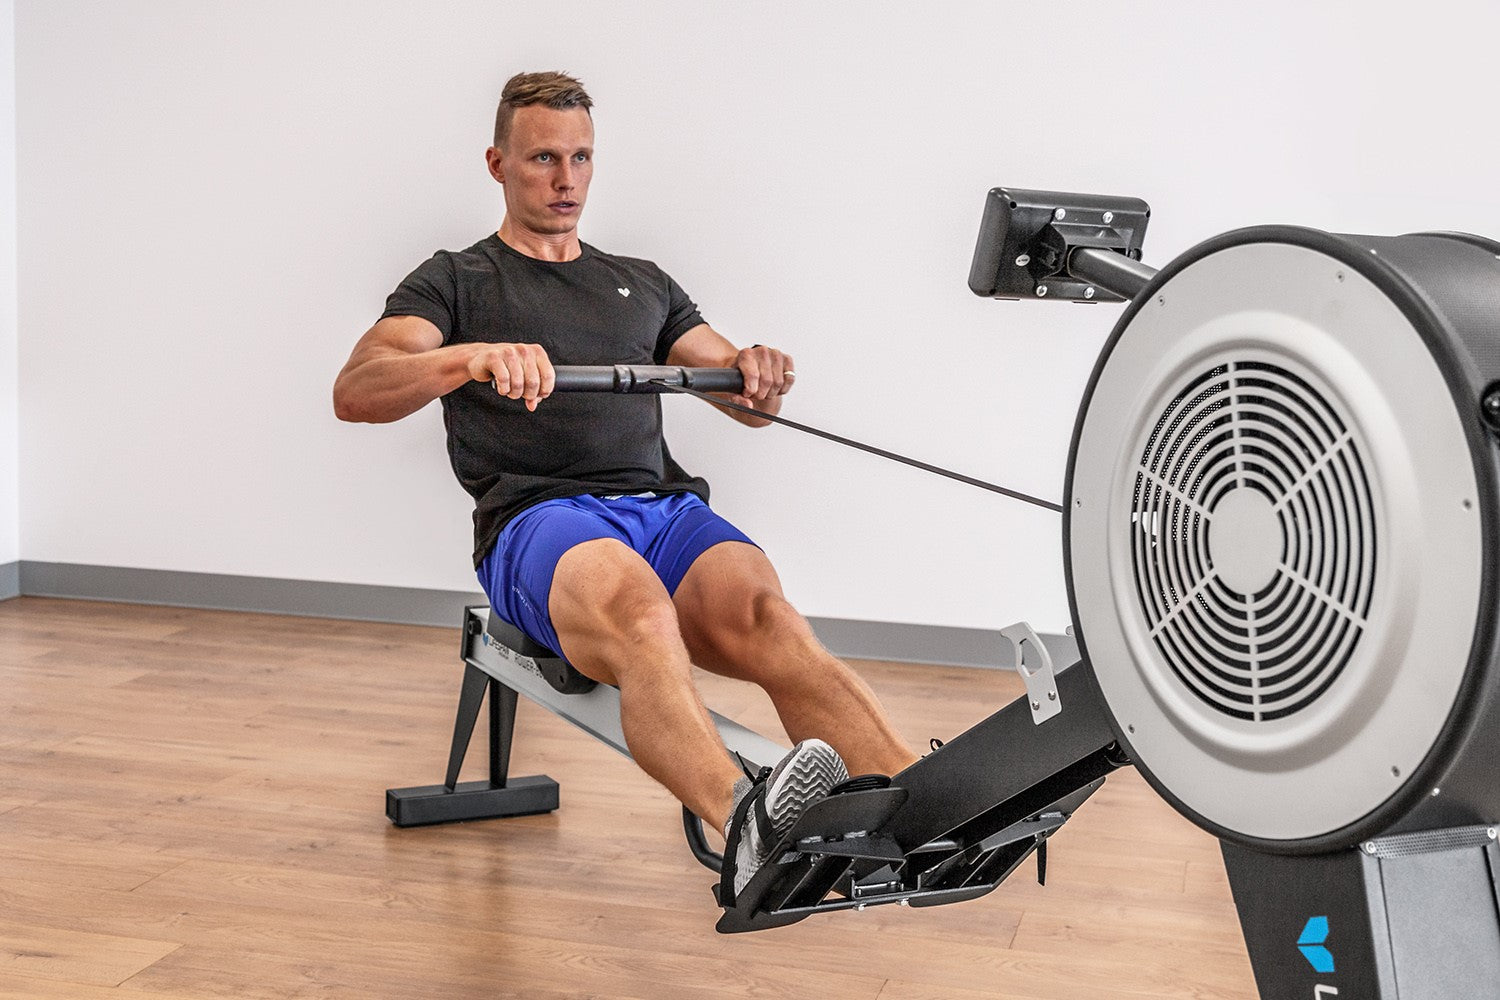 Are Rowing Machines Good for Weight Loss?